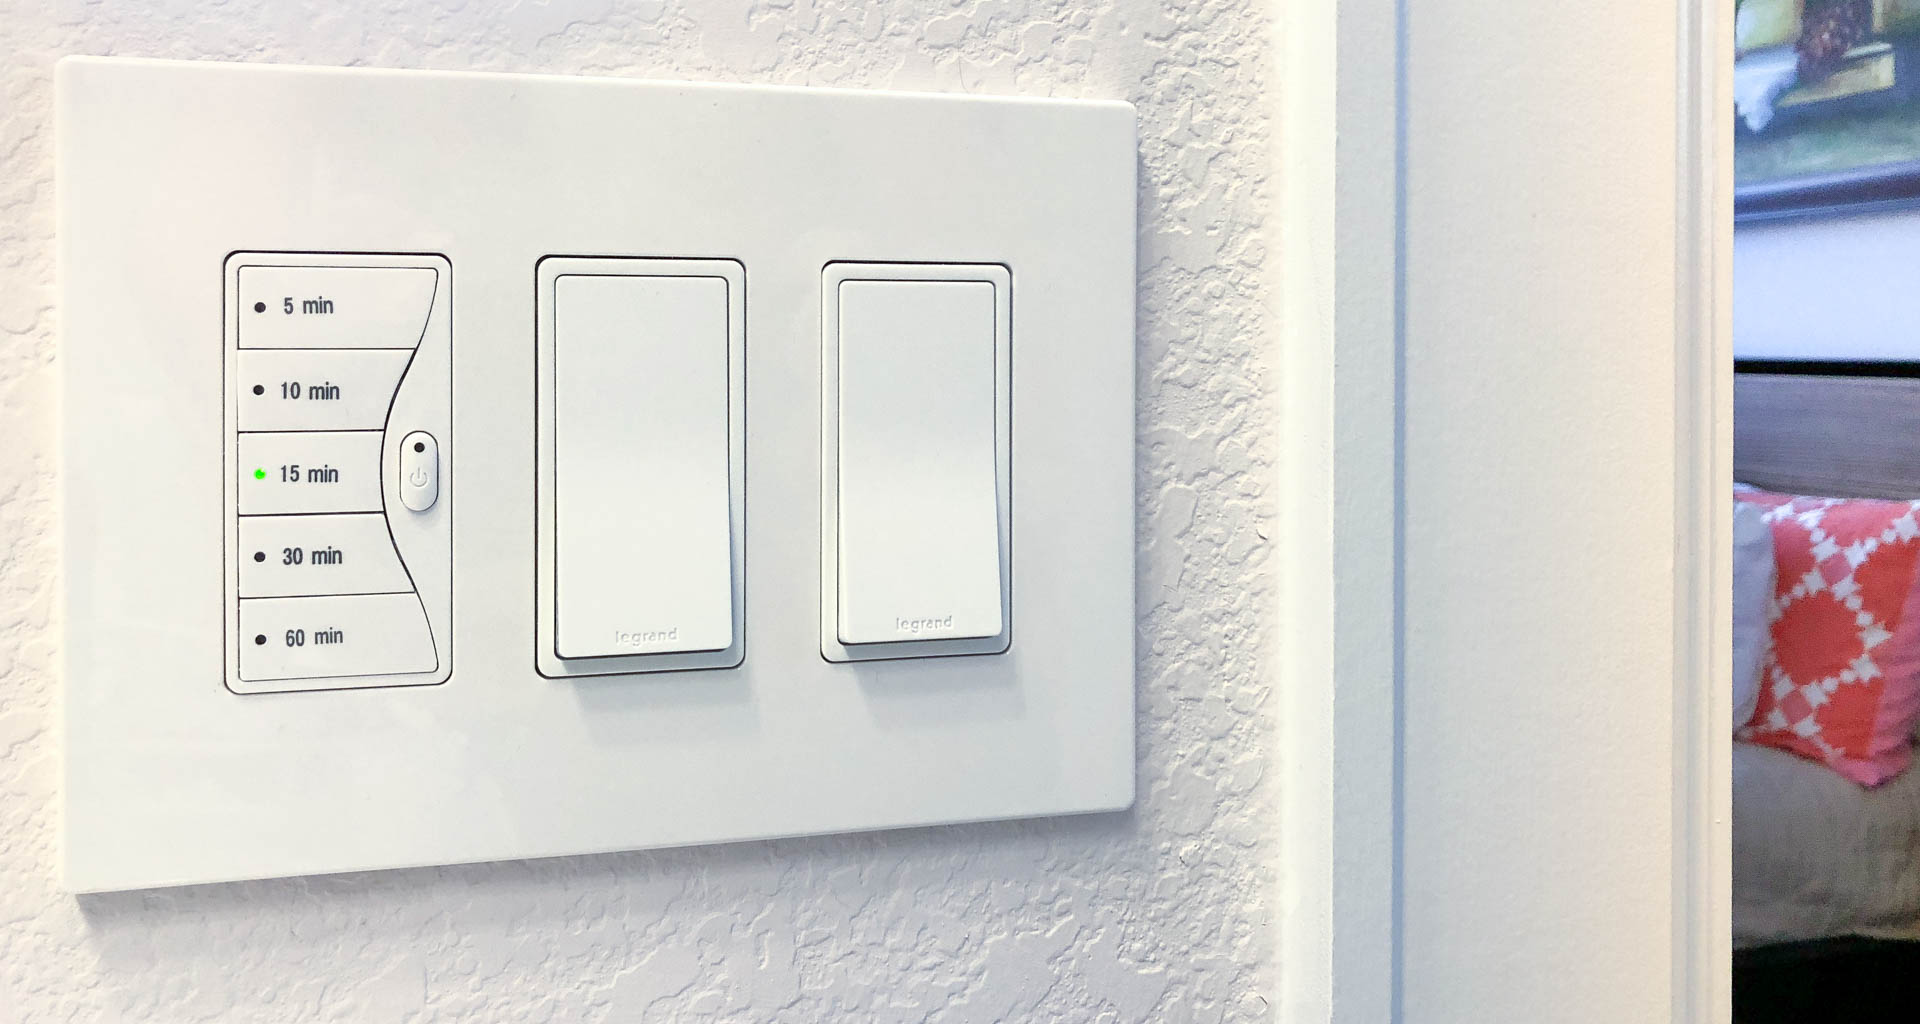 Beyond the aesthetics of Decora-style outlets, upgrading the wiring system in your home adds safety and flexibility to every room. Image: Digitized House.